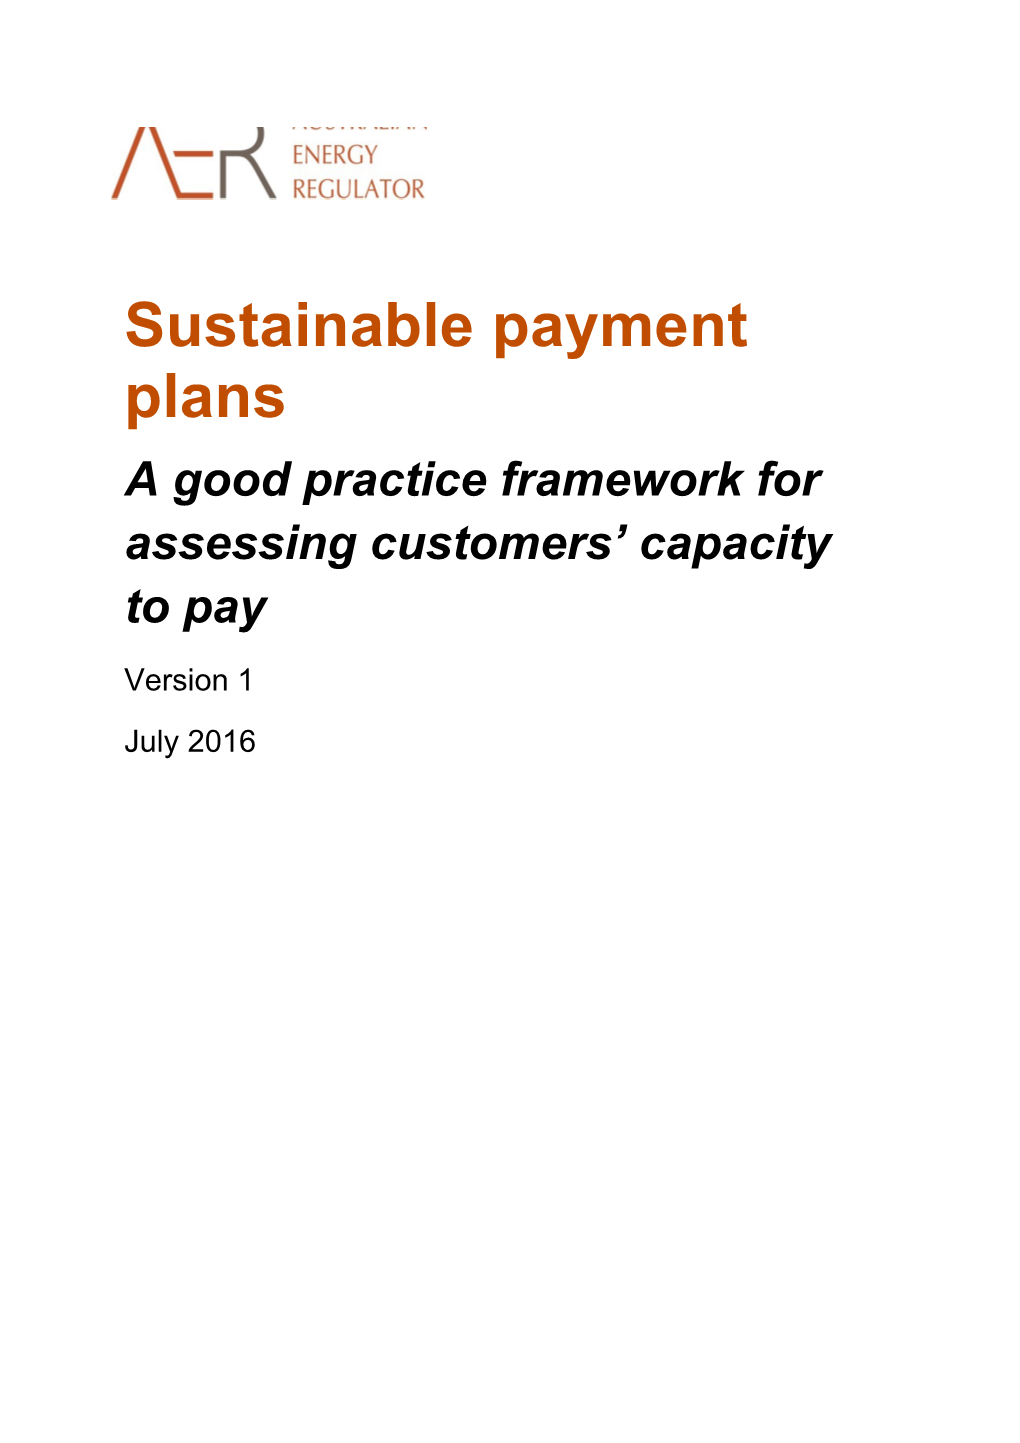 AER Sustainable Payment Plans Framework - Version 1 - July 2016